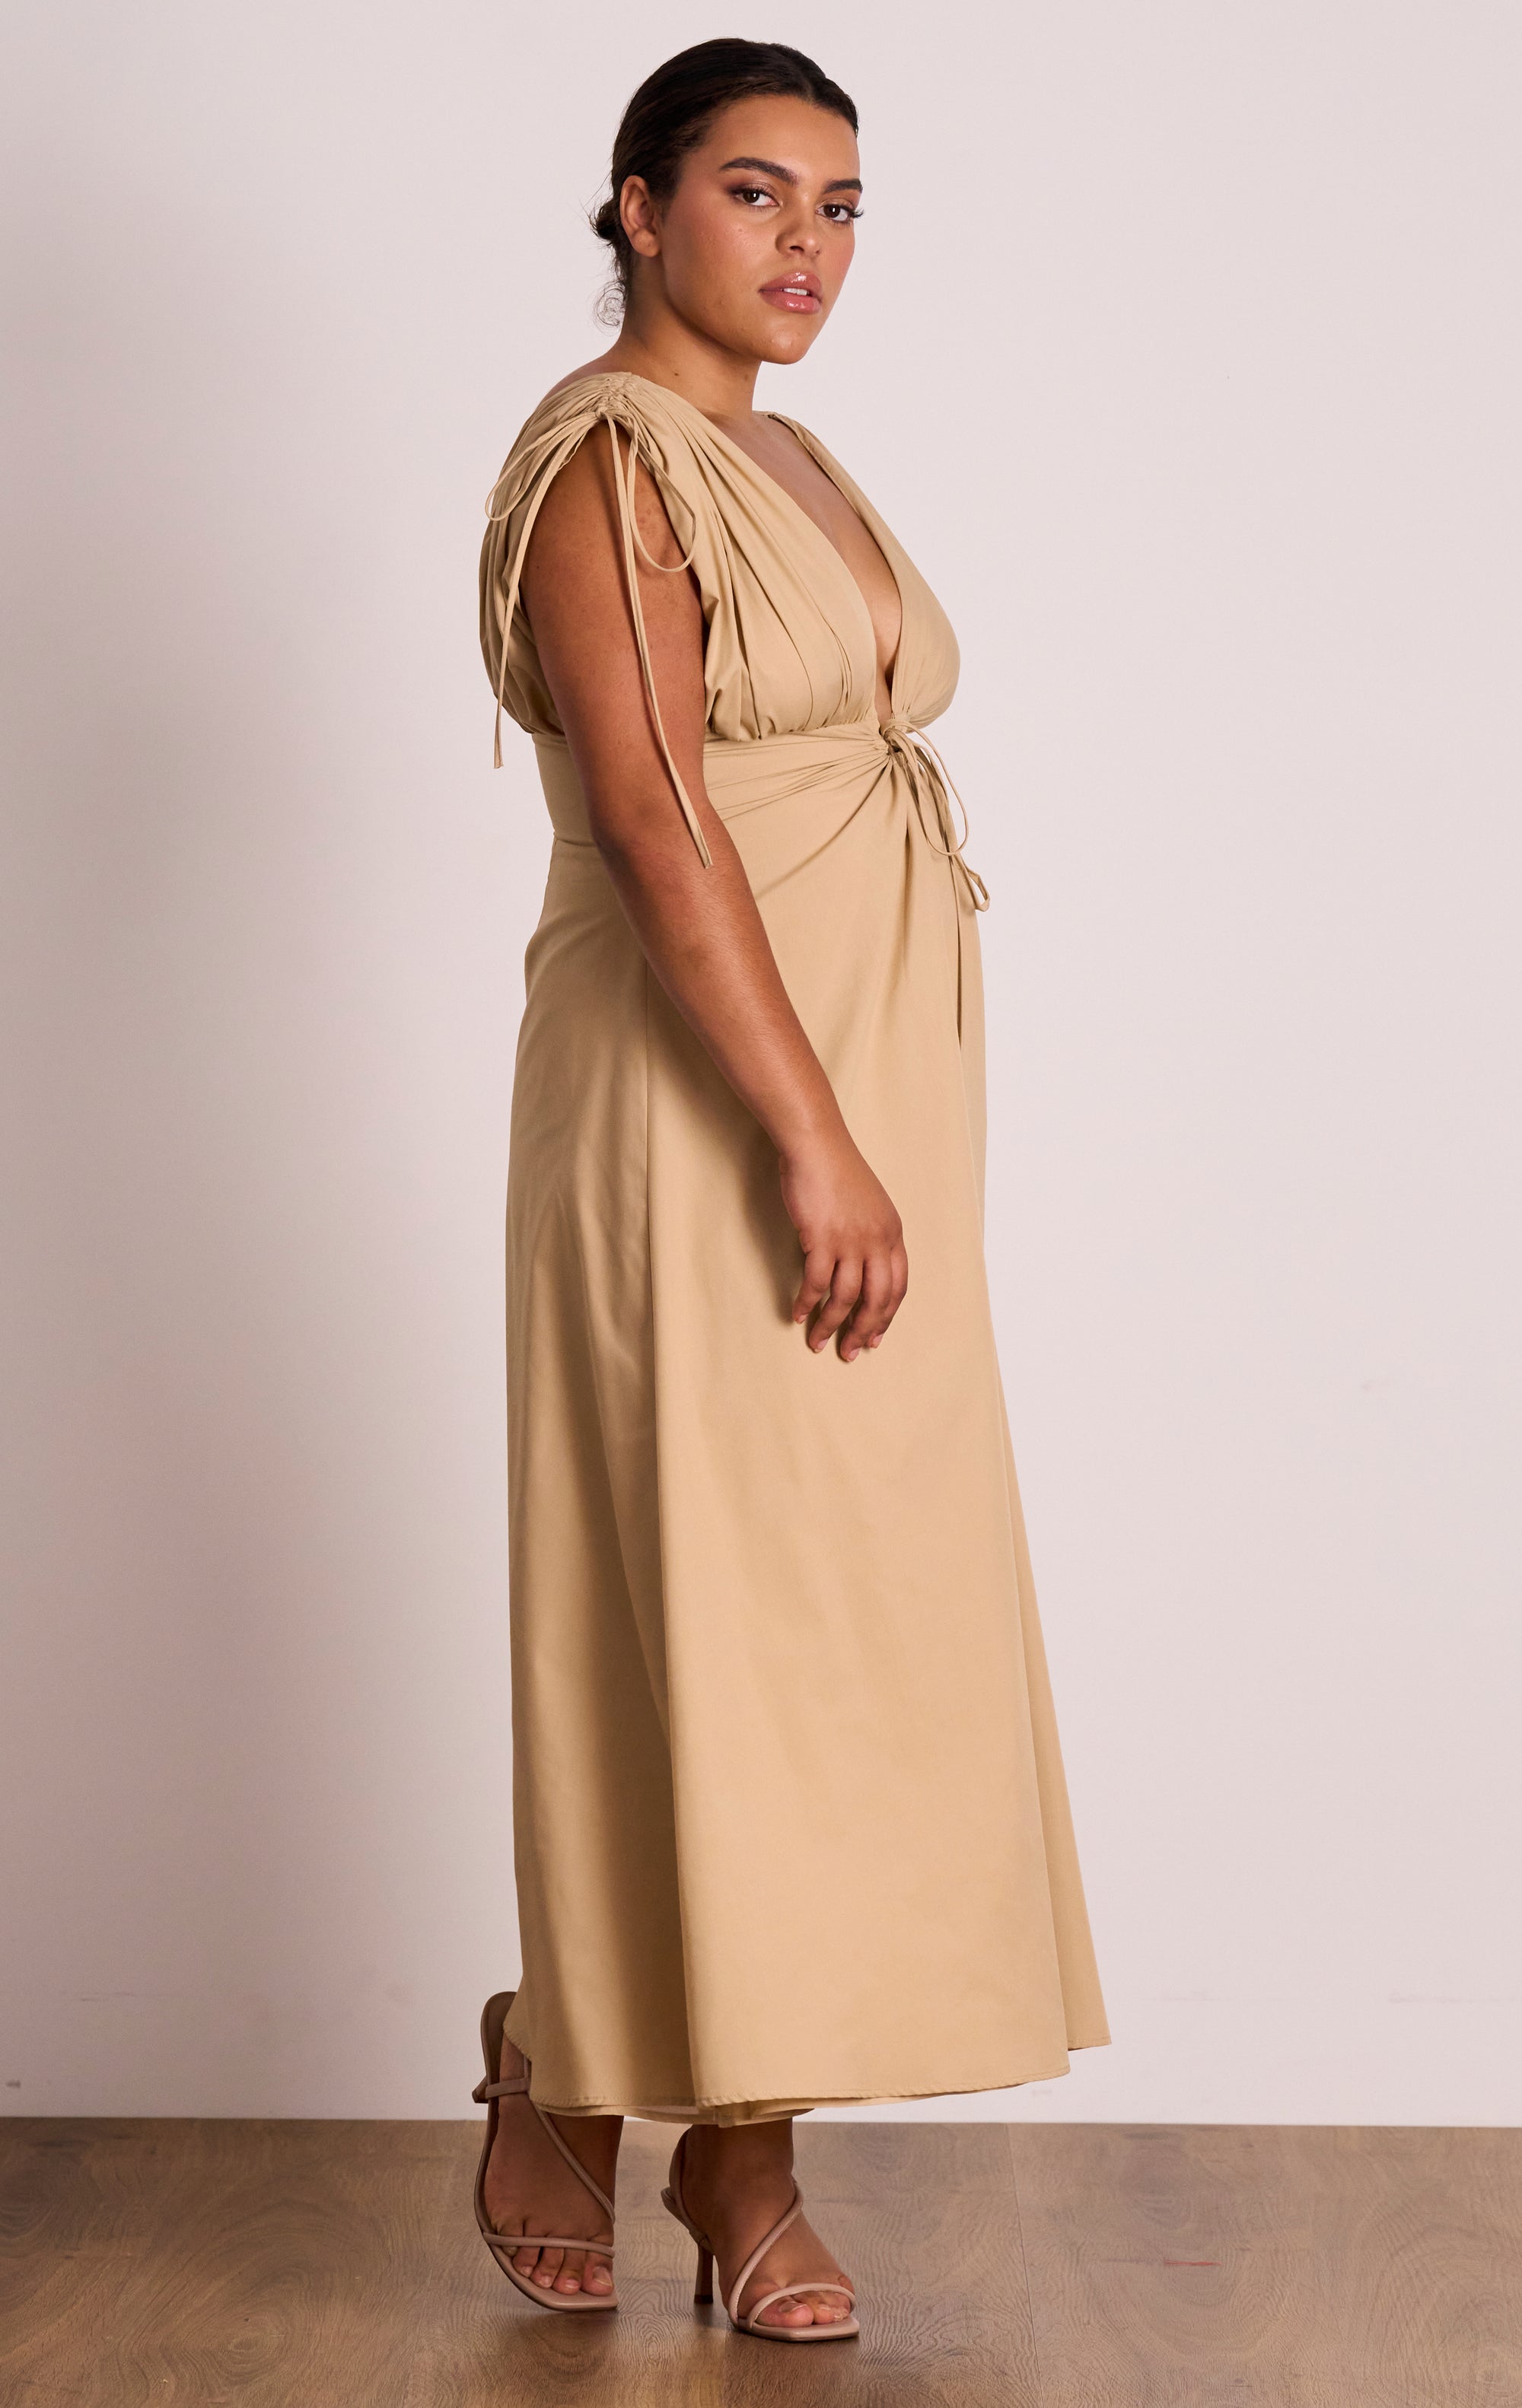 Heatwave Midi - TAKE 40% OFF DISCOUNT APPLIED AT CHECKOUT